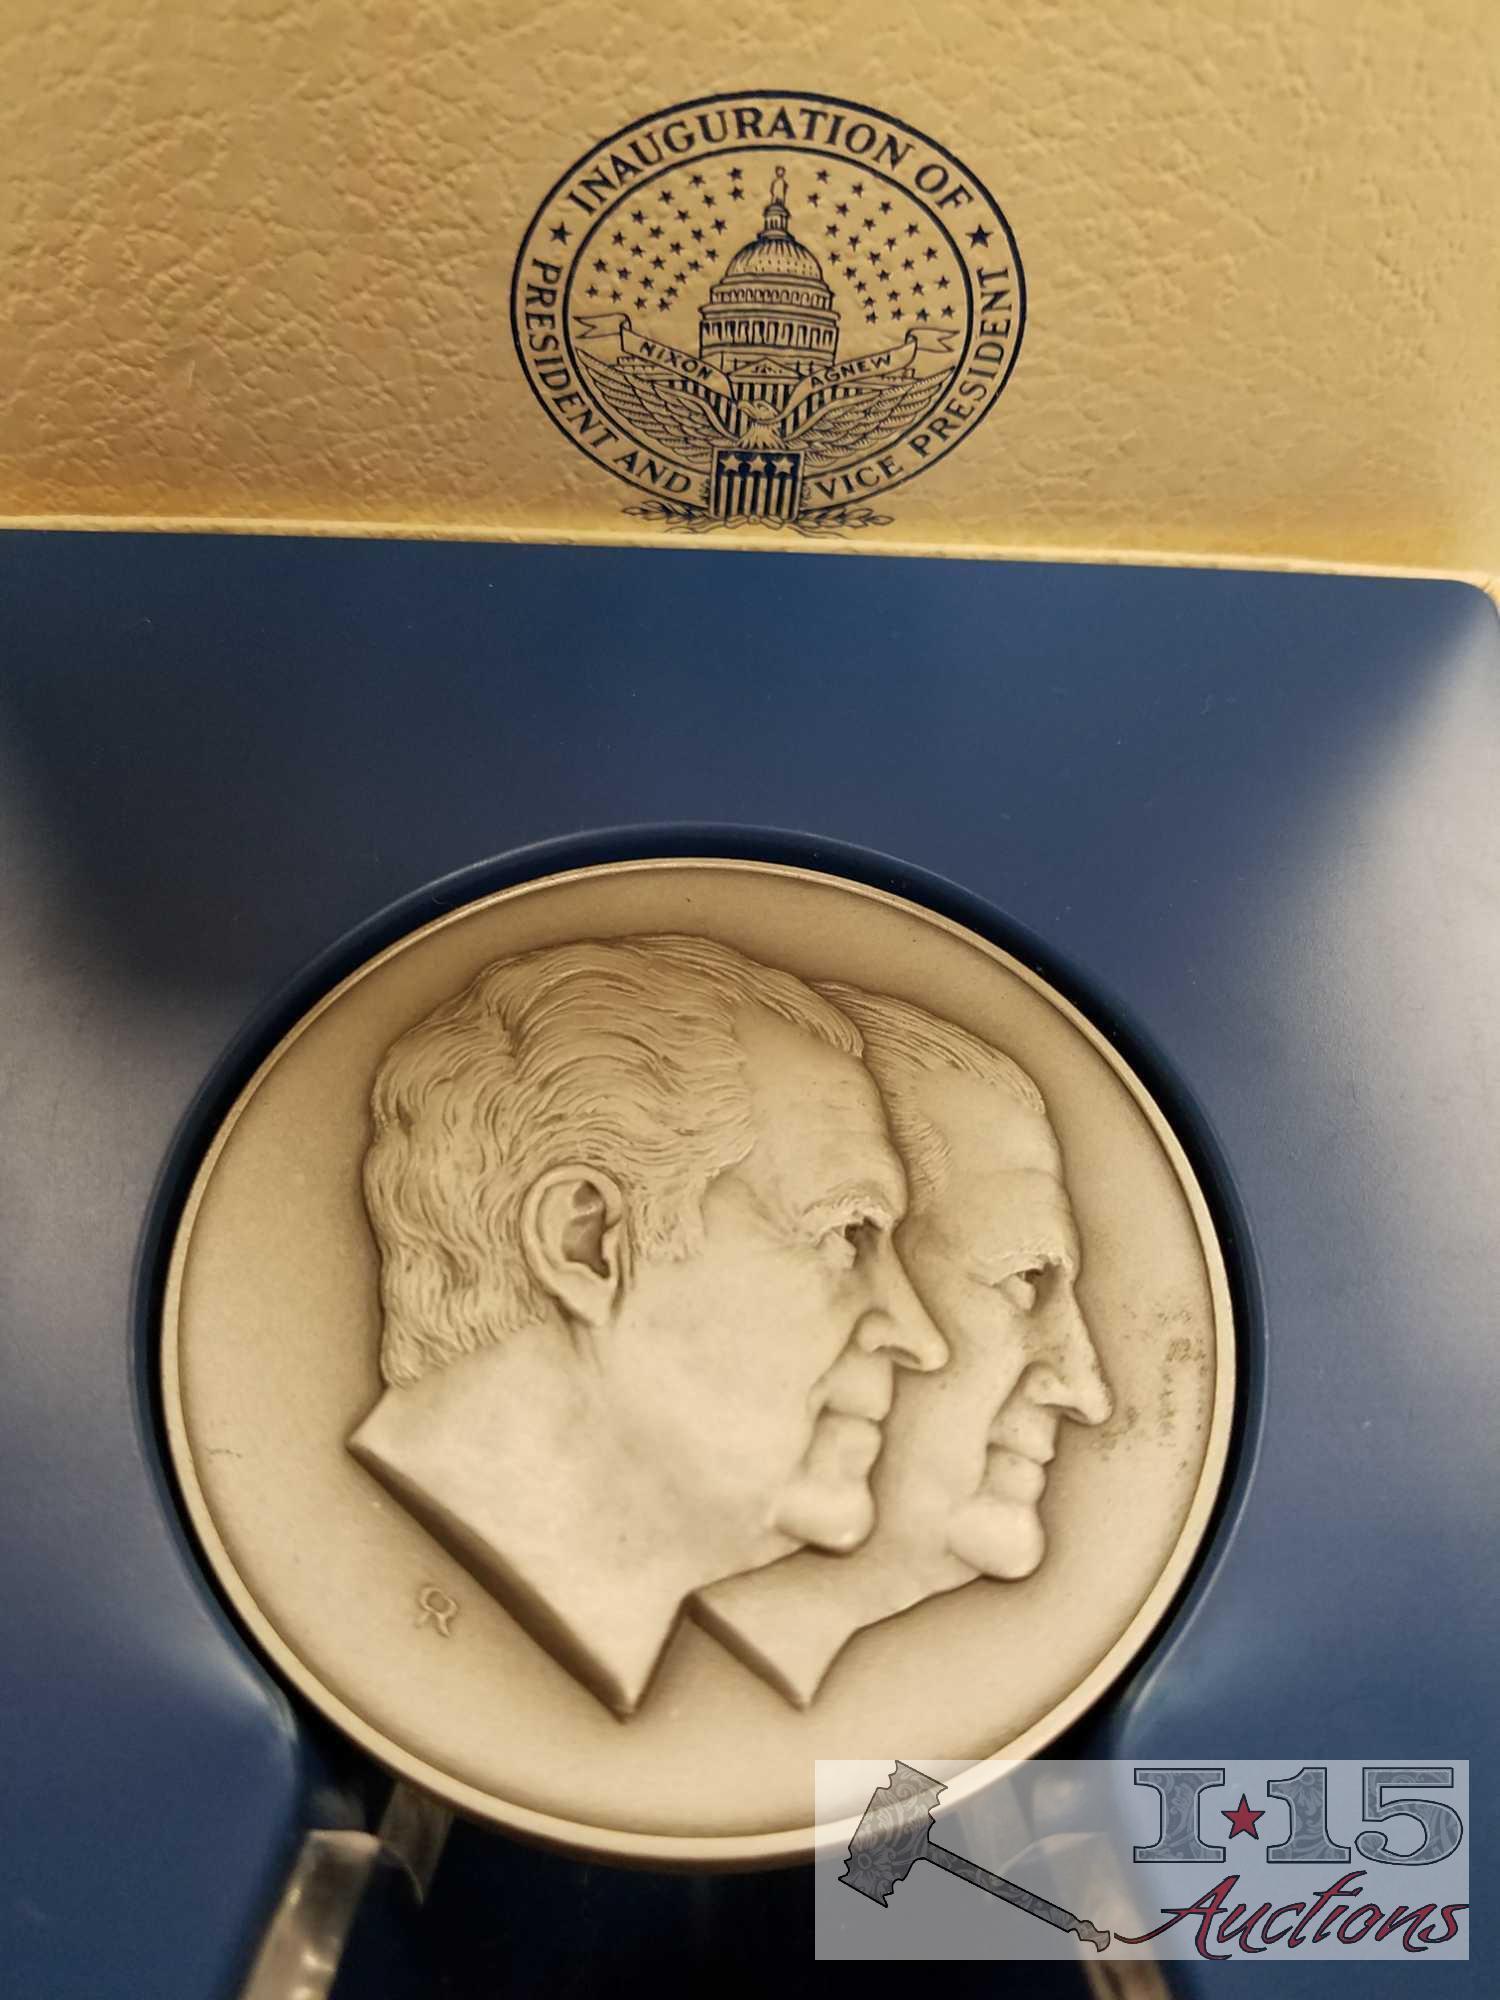 Franklin Mint Bicentennial medal, 1974 and 1976 Franklin Mint limited edition coins and President